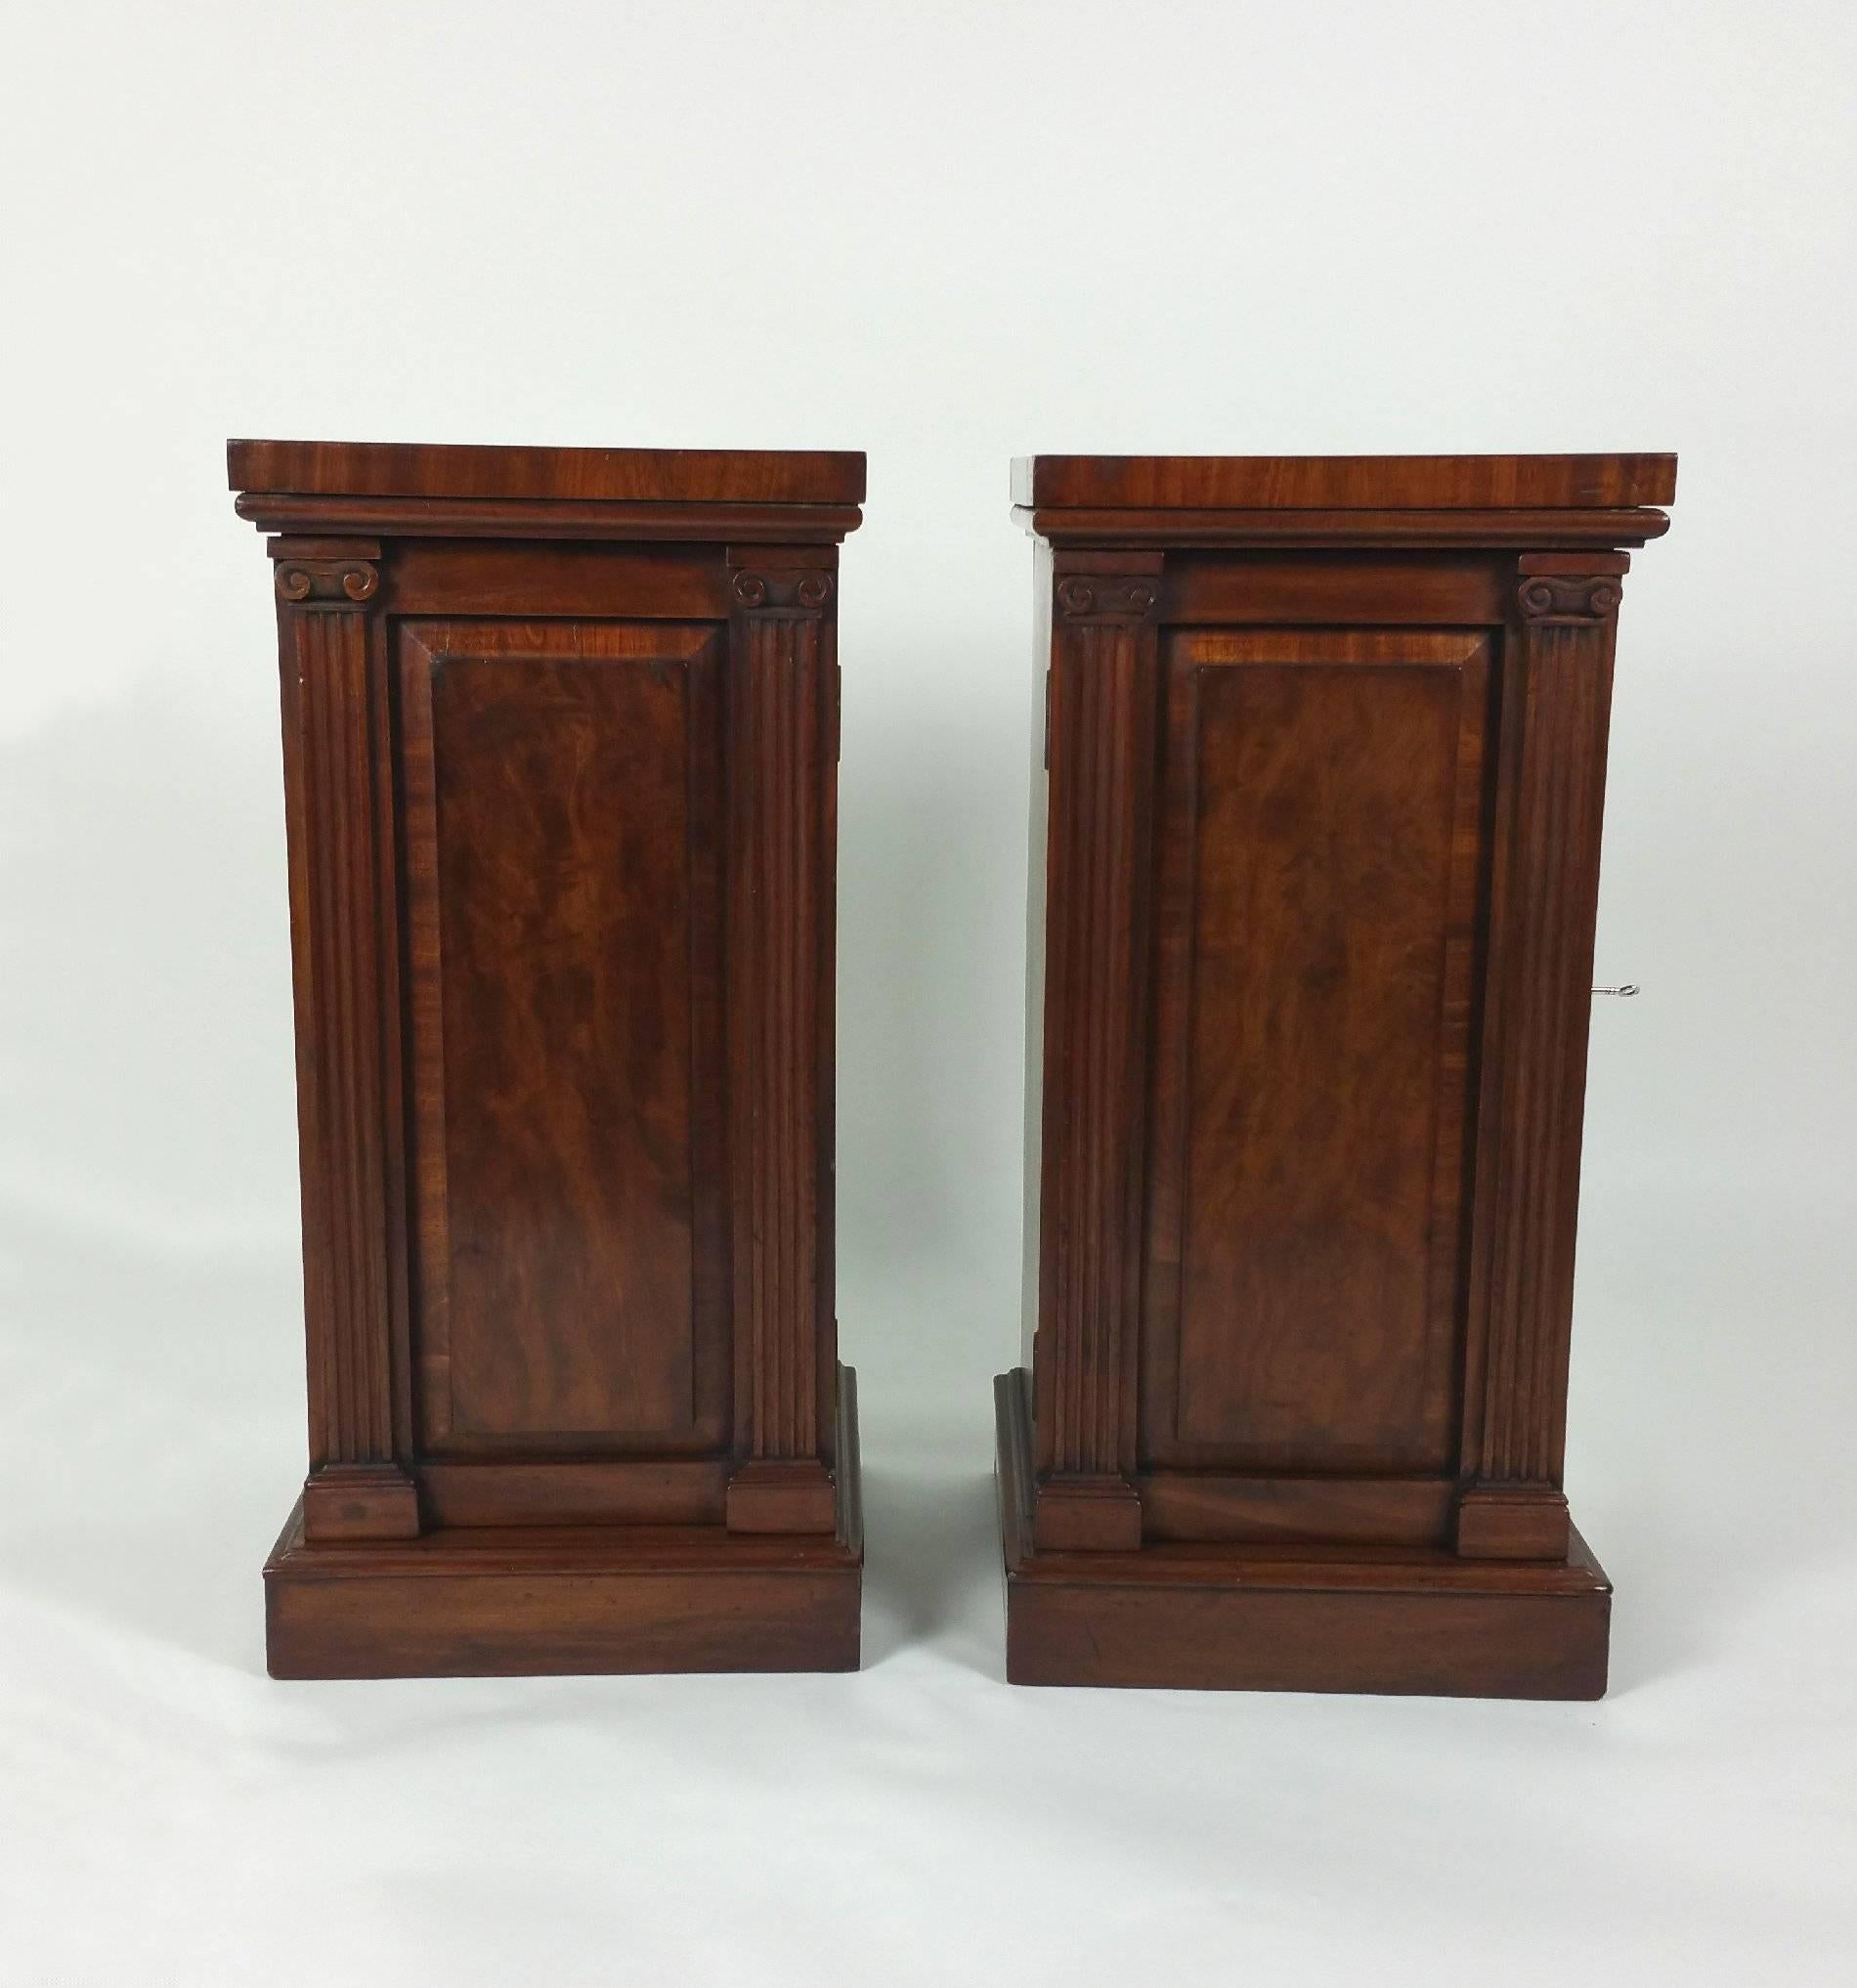 This very handsome and well-proportioned pair of early 19th century mahogany pedestals feature a lovely Greek Revival carved pilaster design and are stamped James Winter, Wardour Street, London – A very well-known cabinet maker of the period. Each